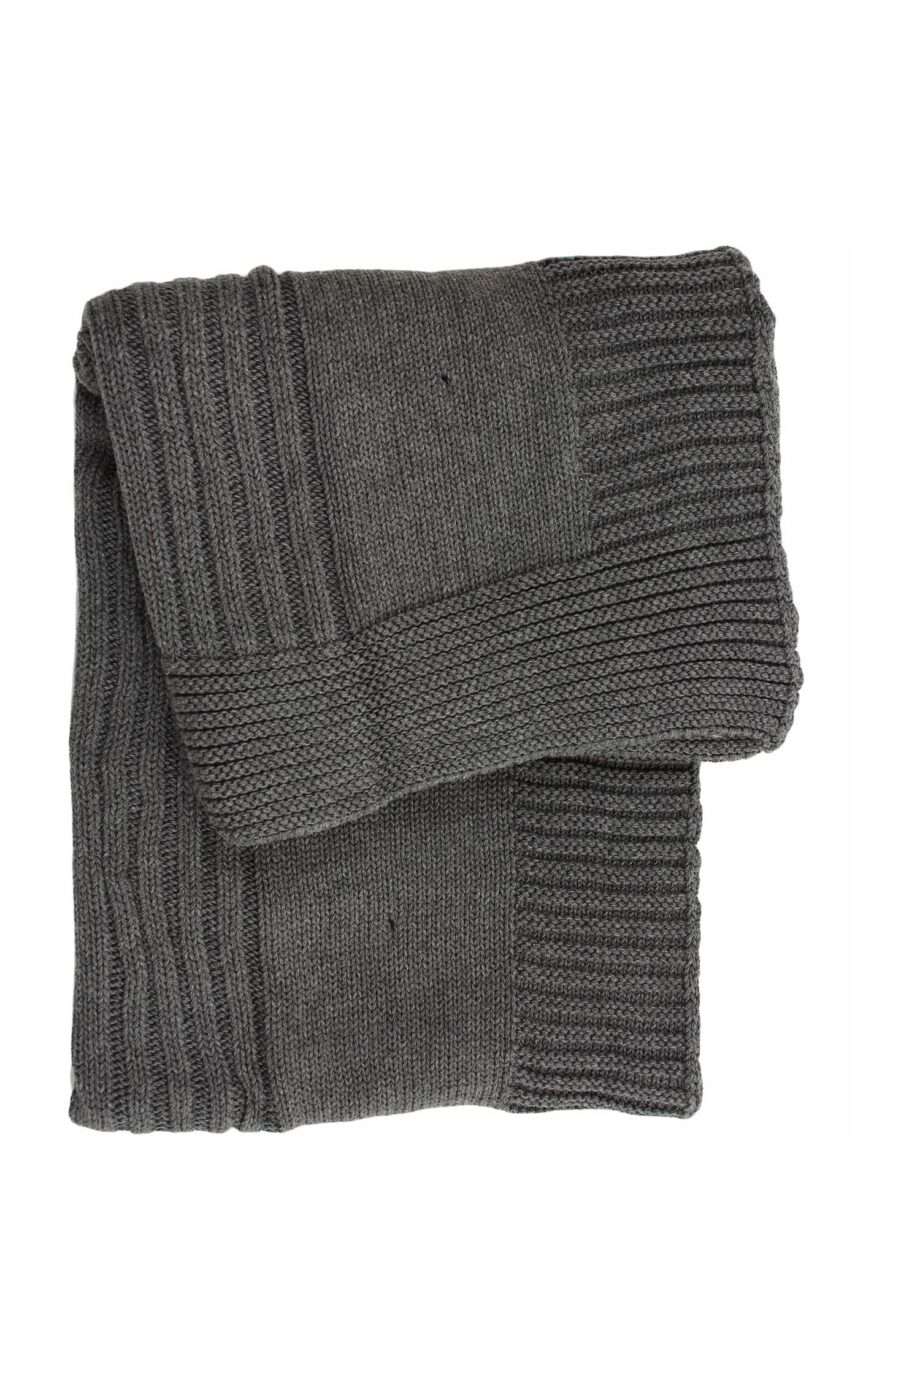 anthracite knitted cotton little blanket small